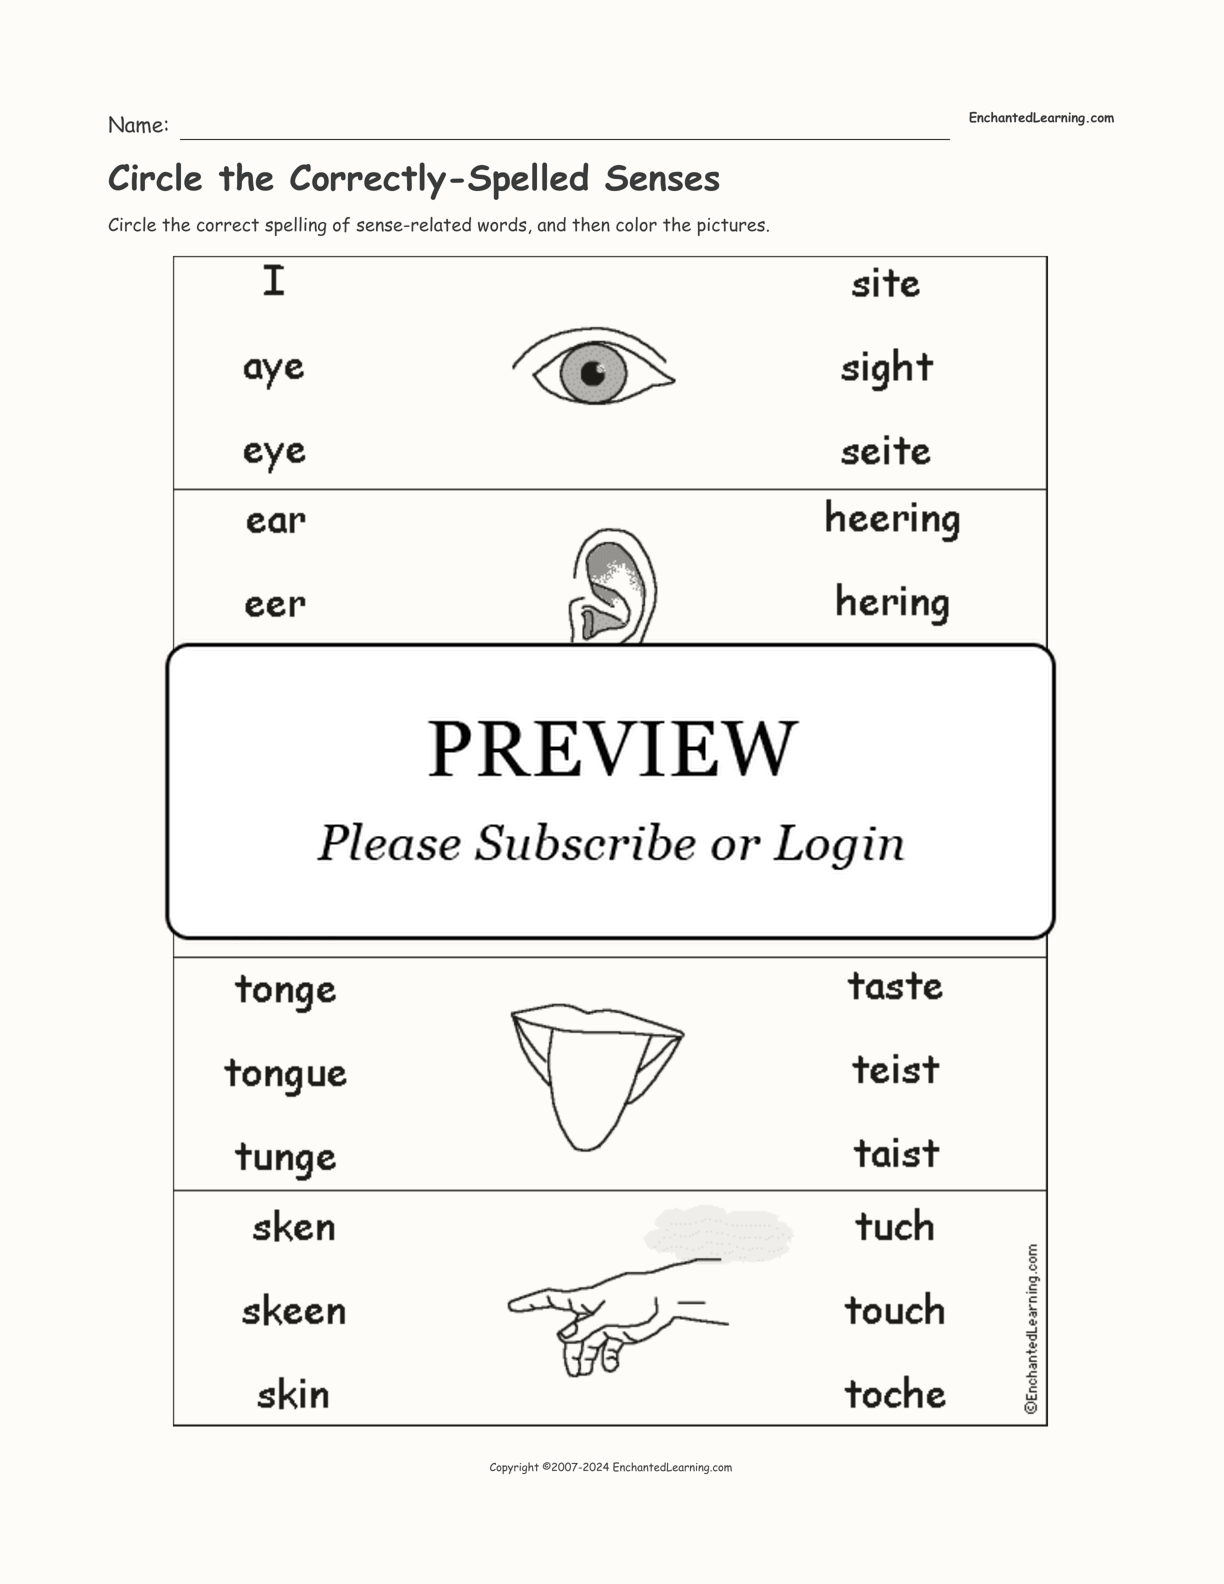 Circle the Correctly-Spelled Senses interactive worksheet page 1